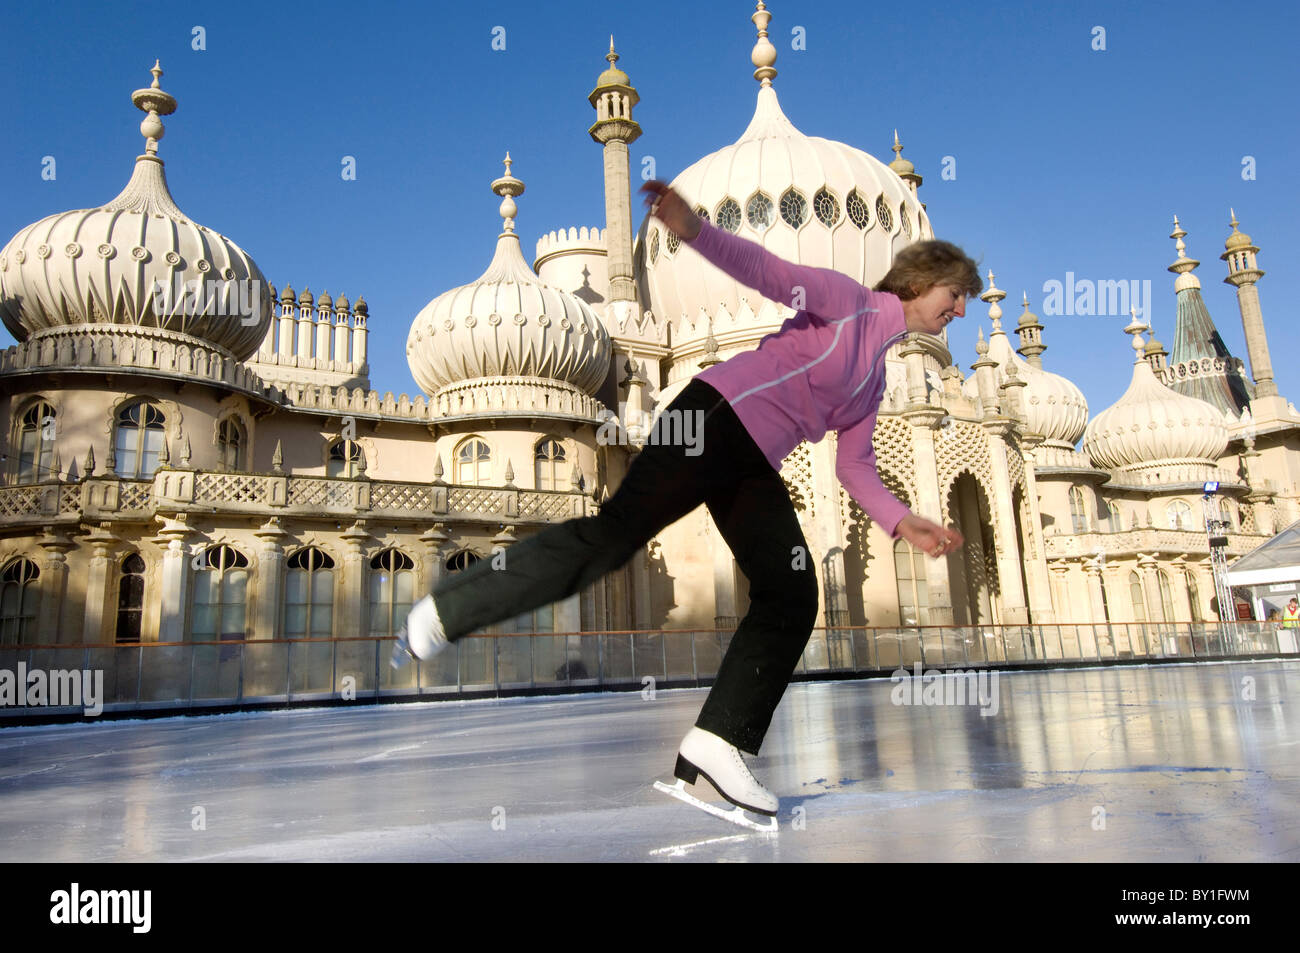 A woman skater on the temporary pop-up ice skating rink in front of the Brighton Royal Pavilion. Stock Photo